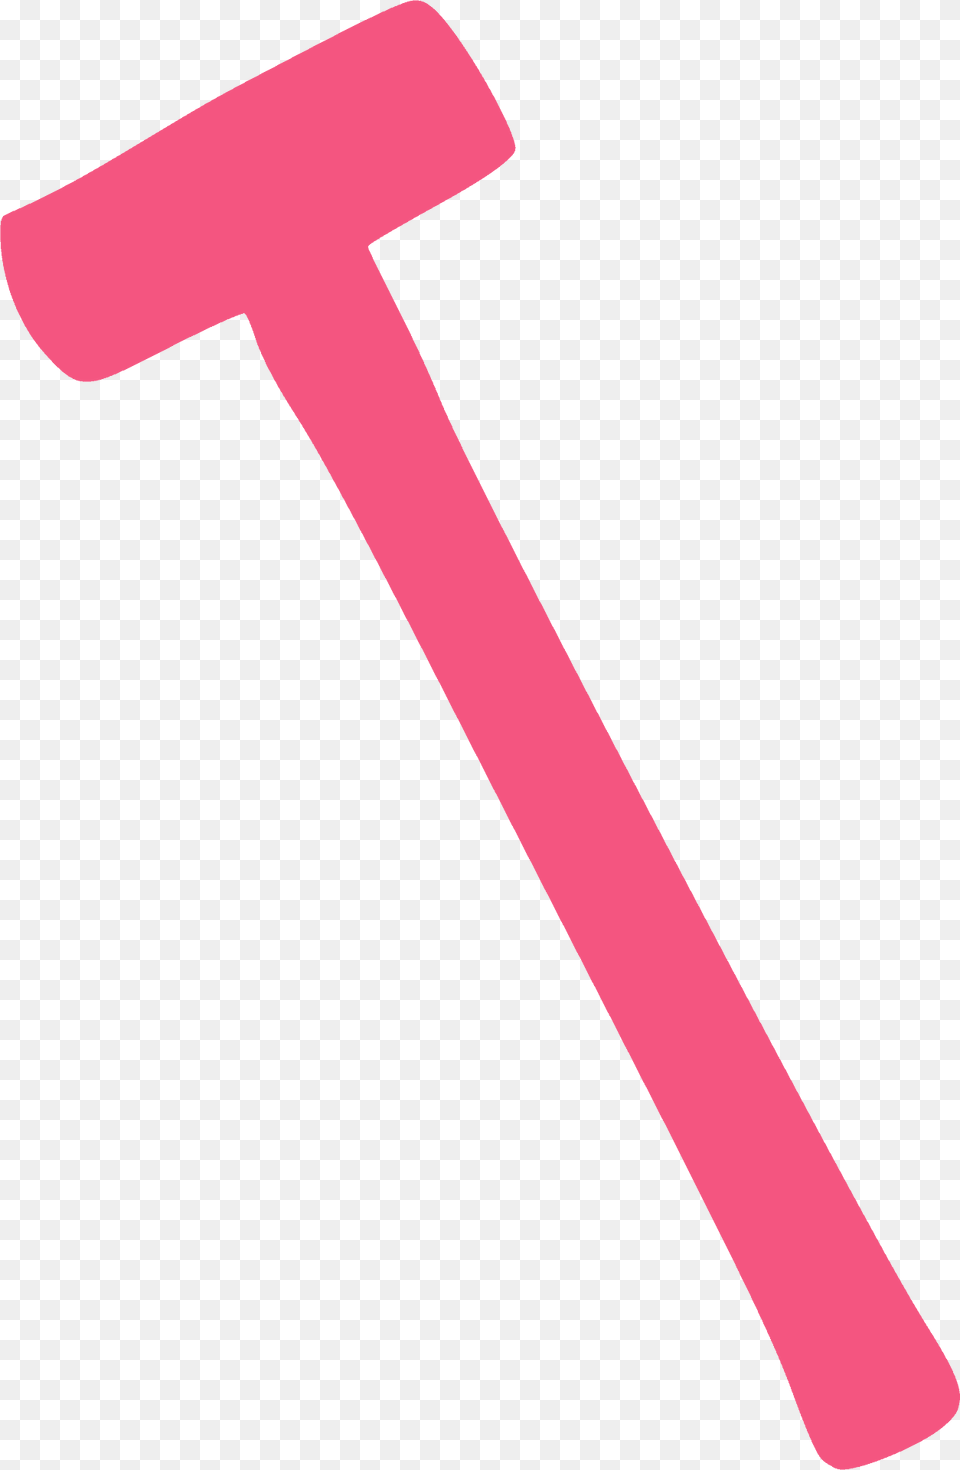 Sledgehammer Silhouette, Device, Hammer, Tool, Mallet Png Image